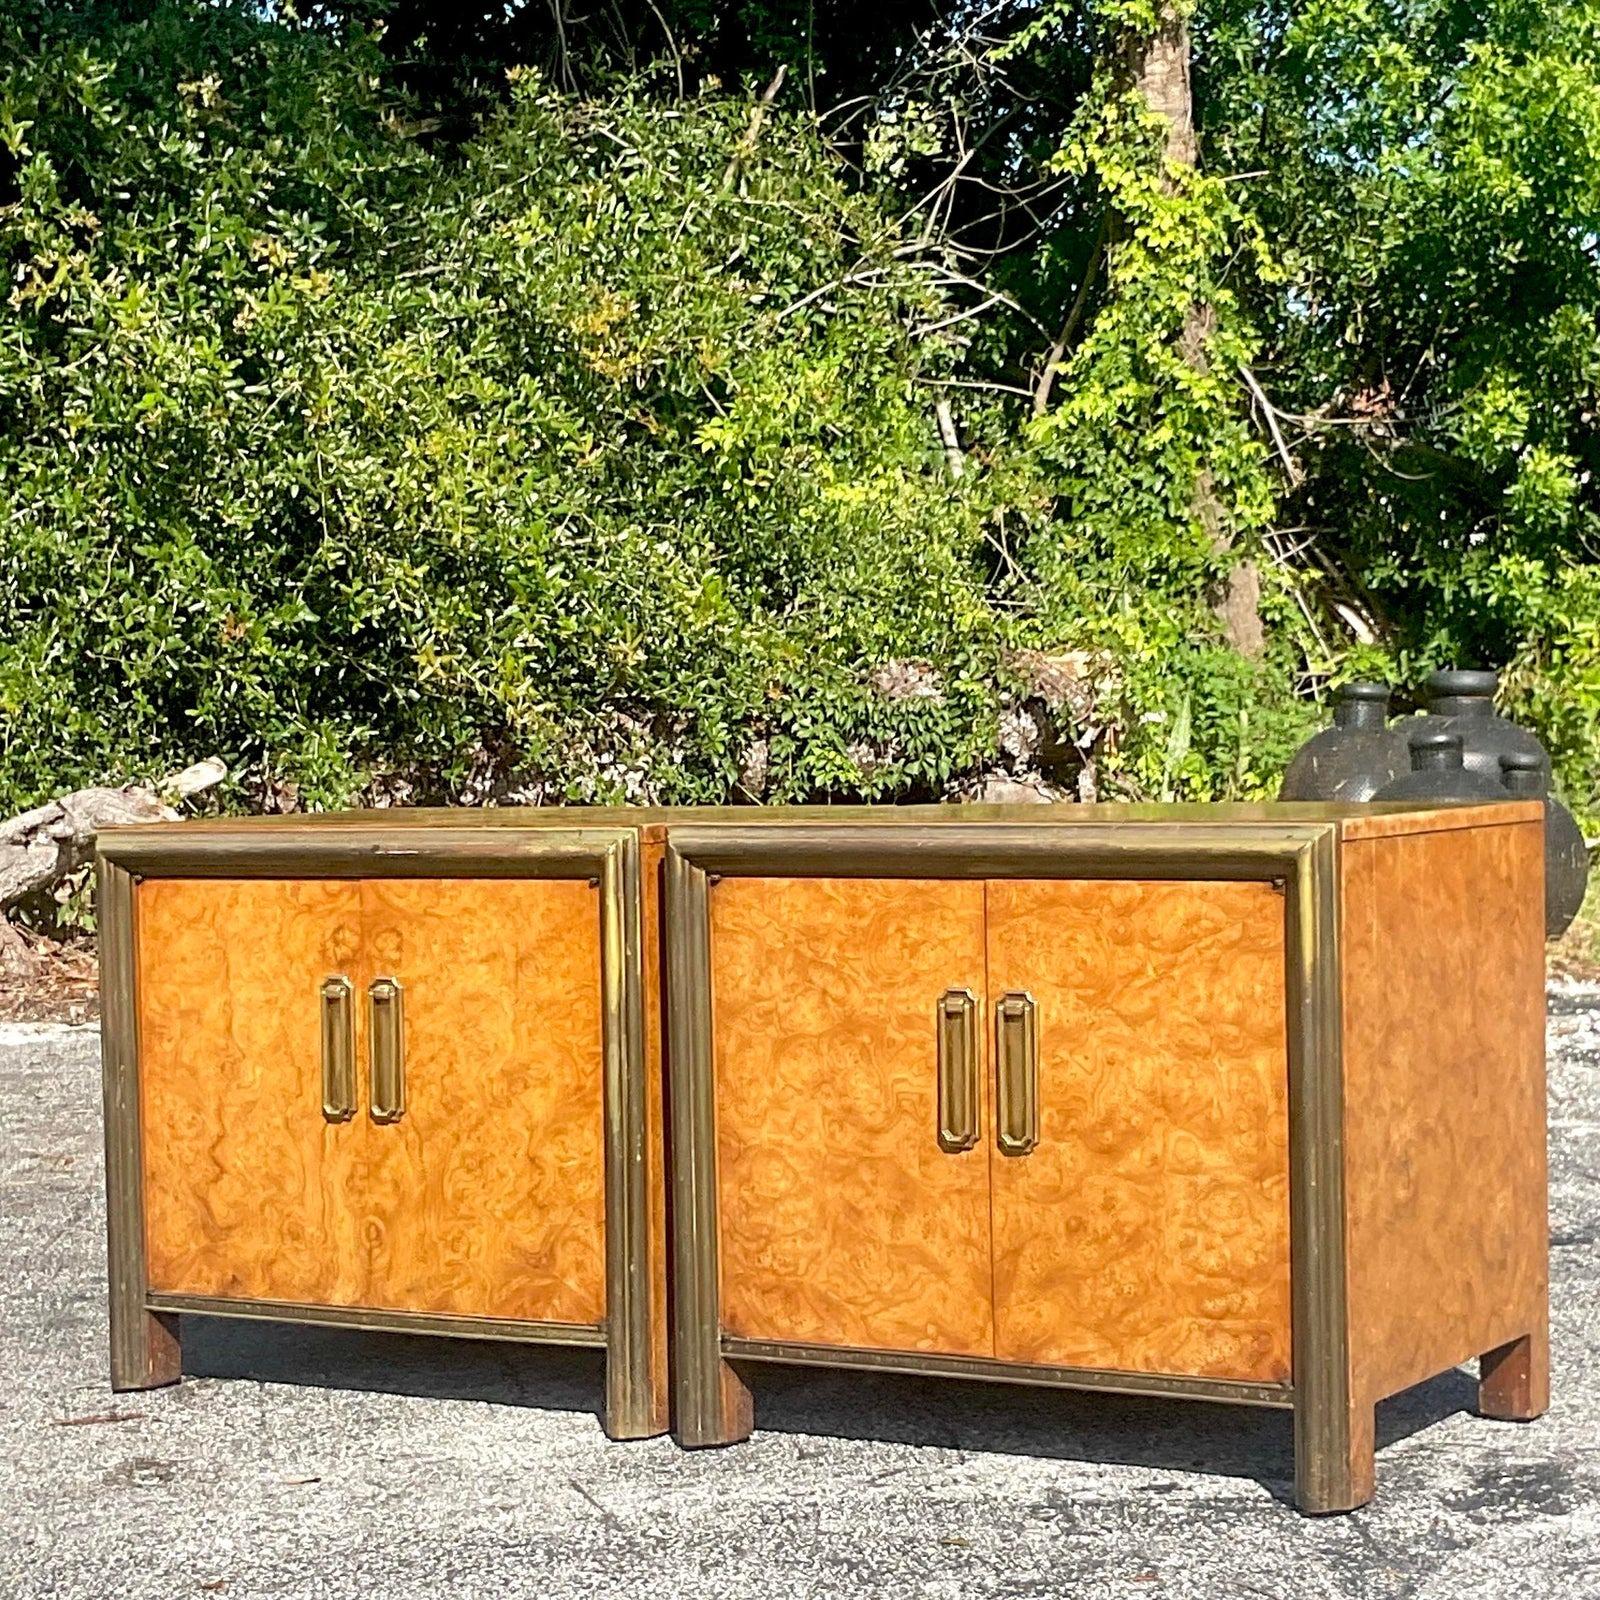 North American Mid 20th Century Vintage Boho Mastercraft Burl Wood Nightstands - a Pair For Sale